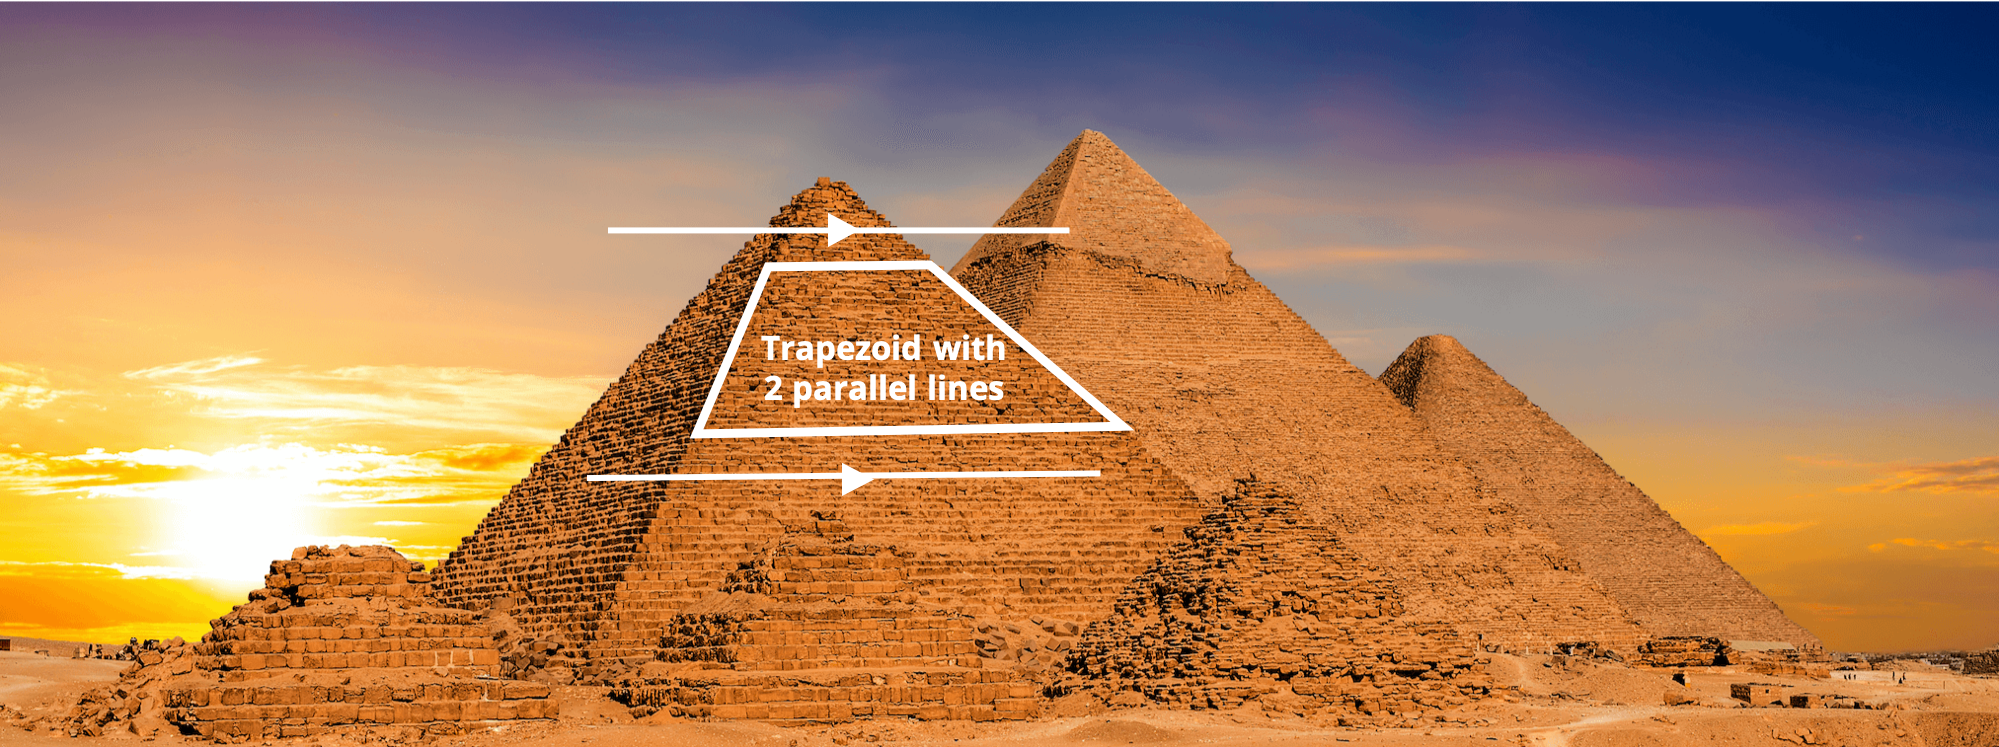 S-5!® Trapezoid Shape on Ancient Pyramids